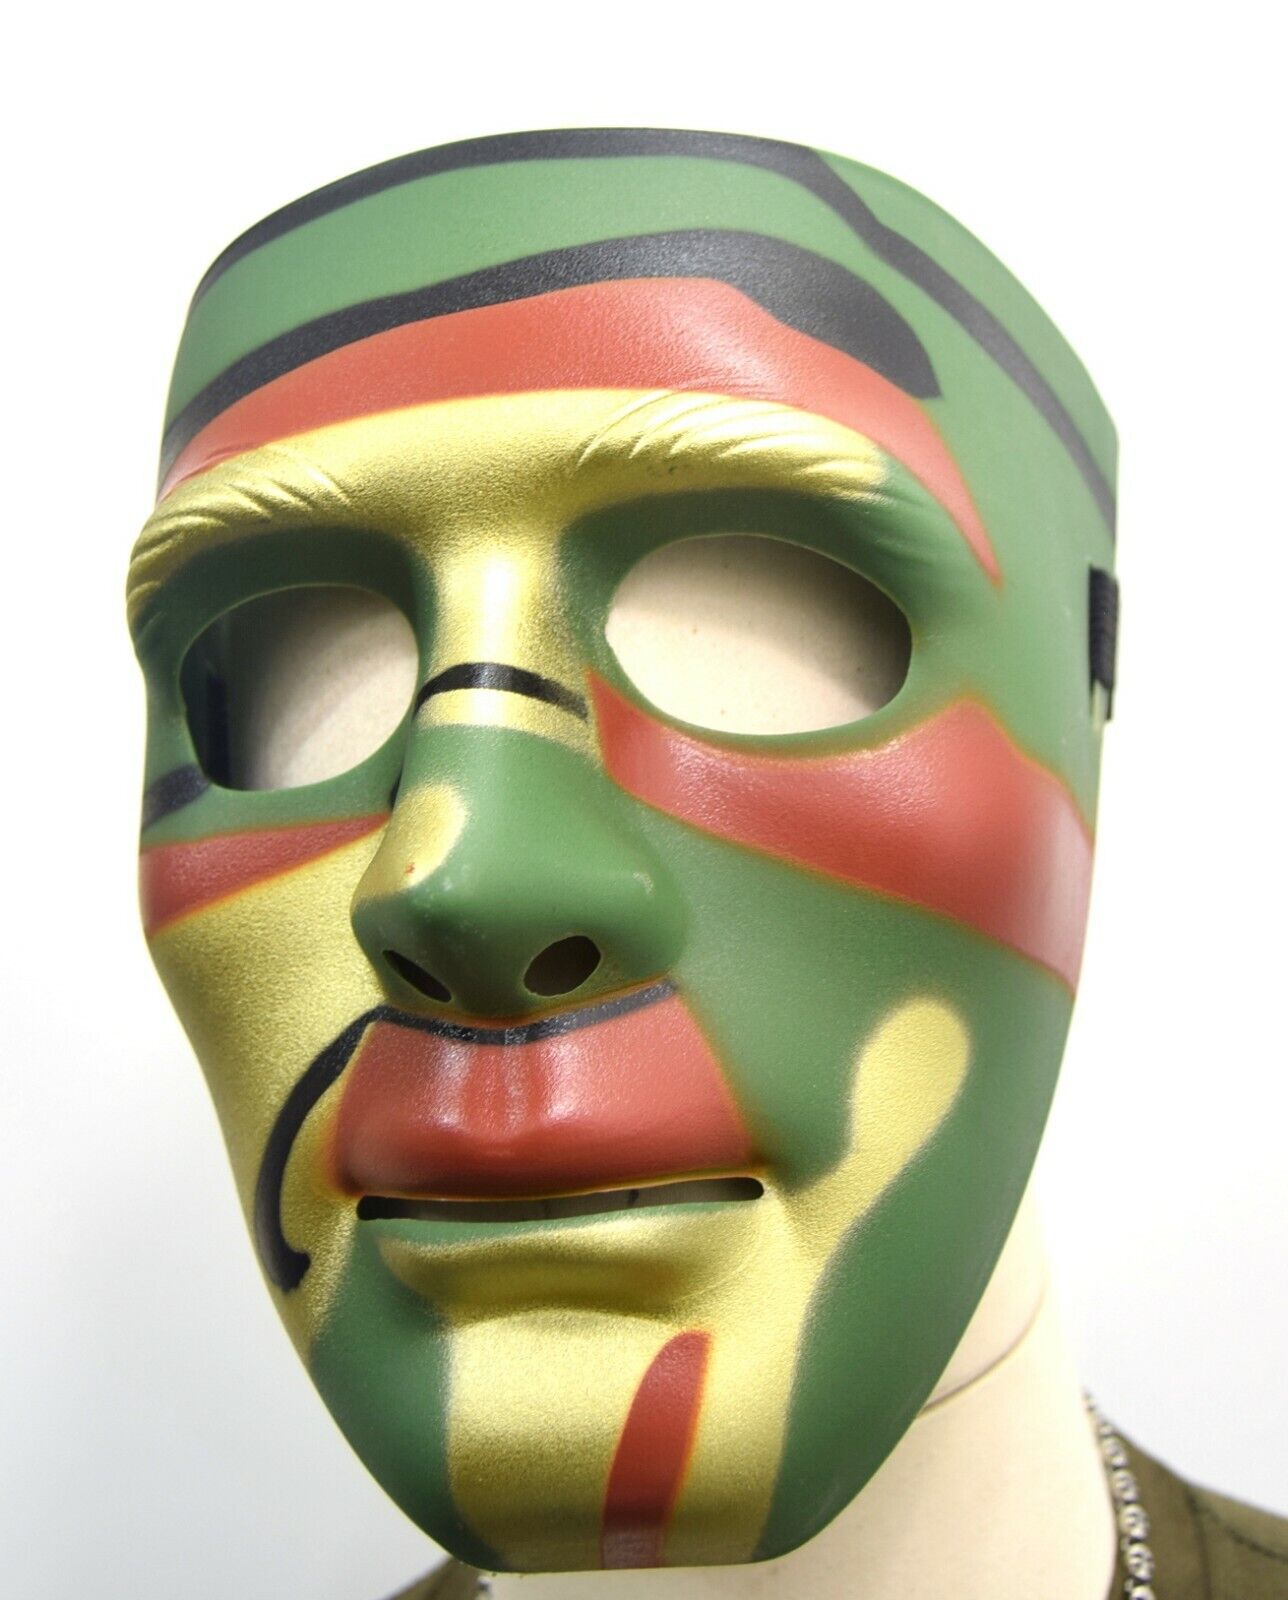 Camo ABS Plastic Protective Full Face Mask Hockey Airsoft Hard Shield Camouflage